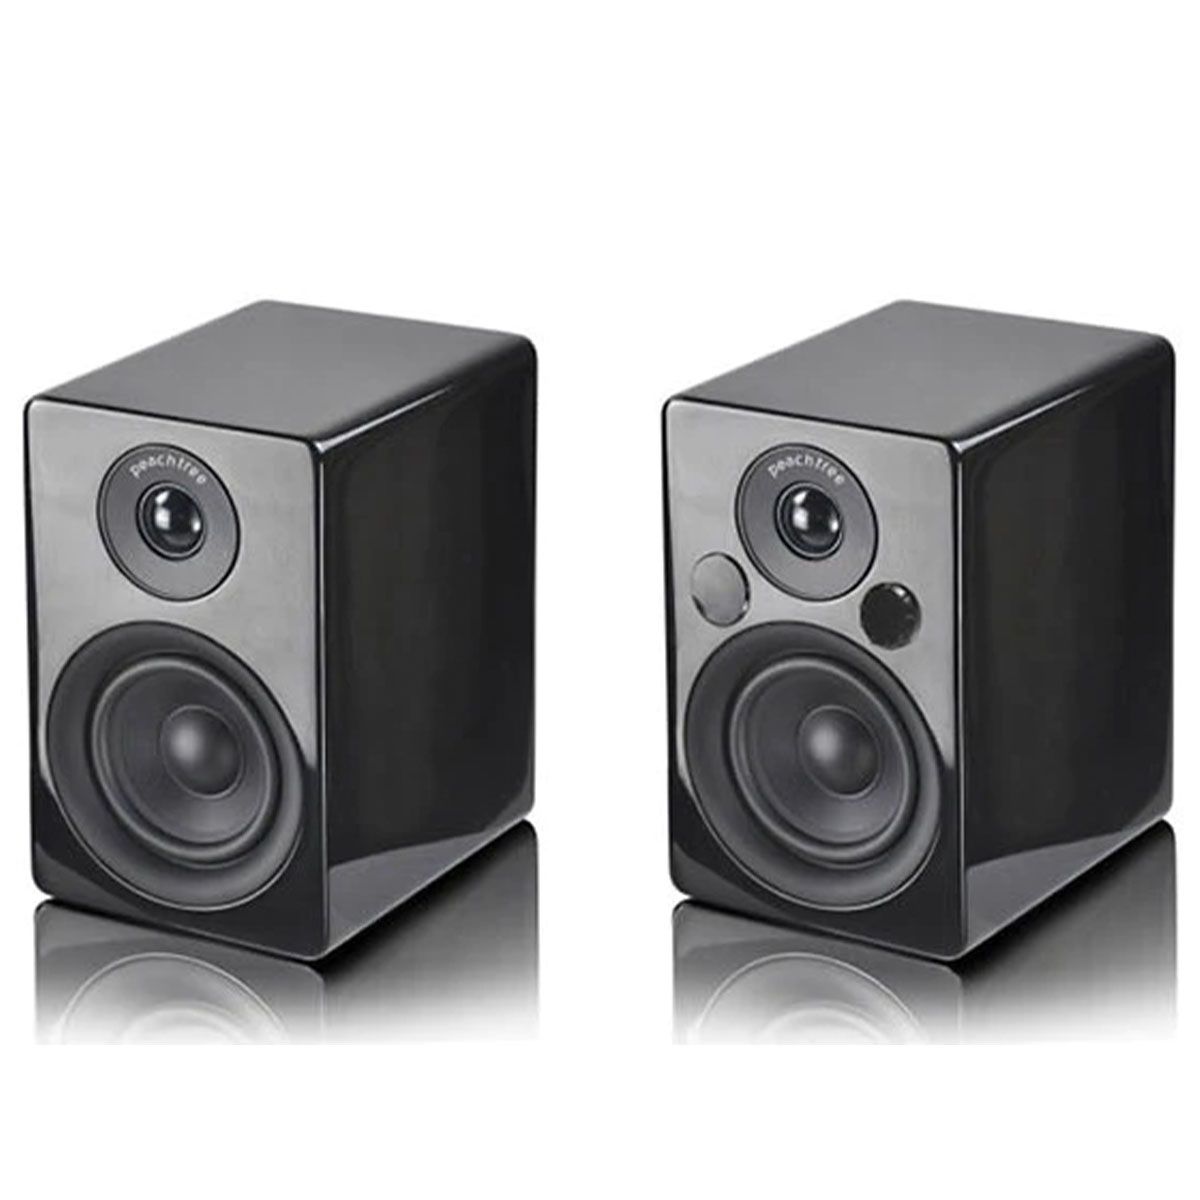 Peachtree M24 Powered Speakers - Piano Black Pair - angled front view